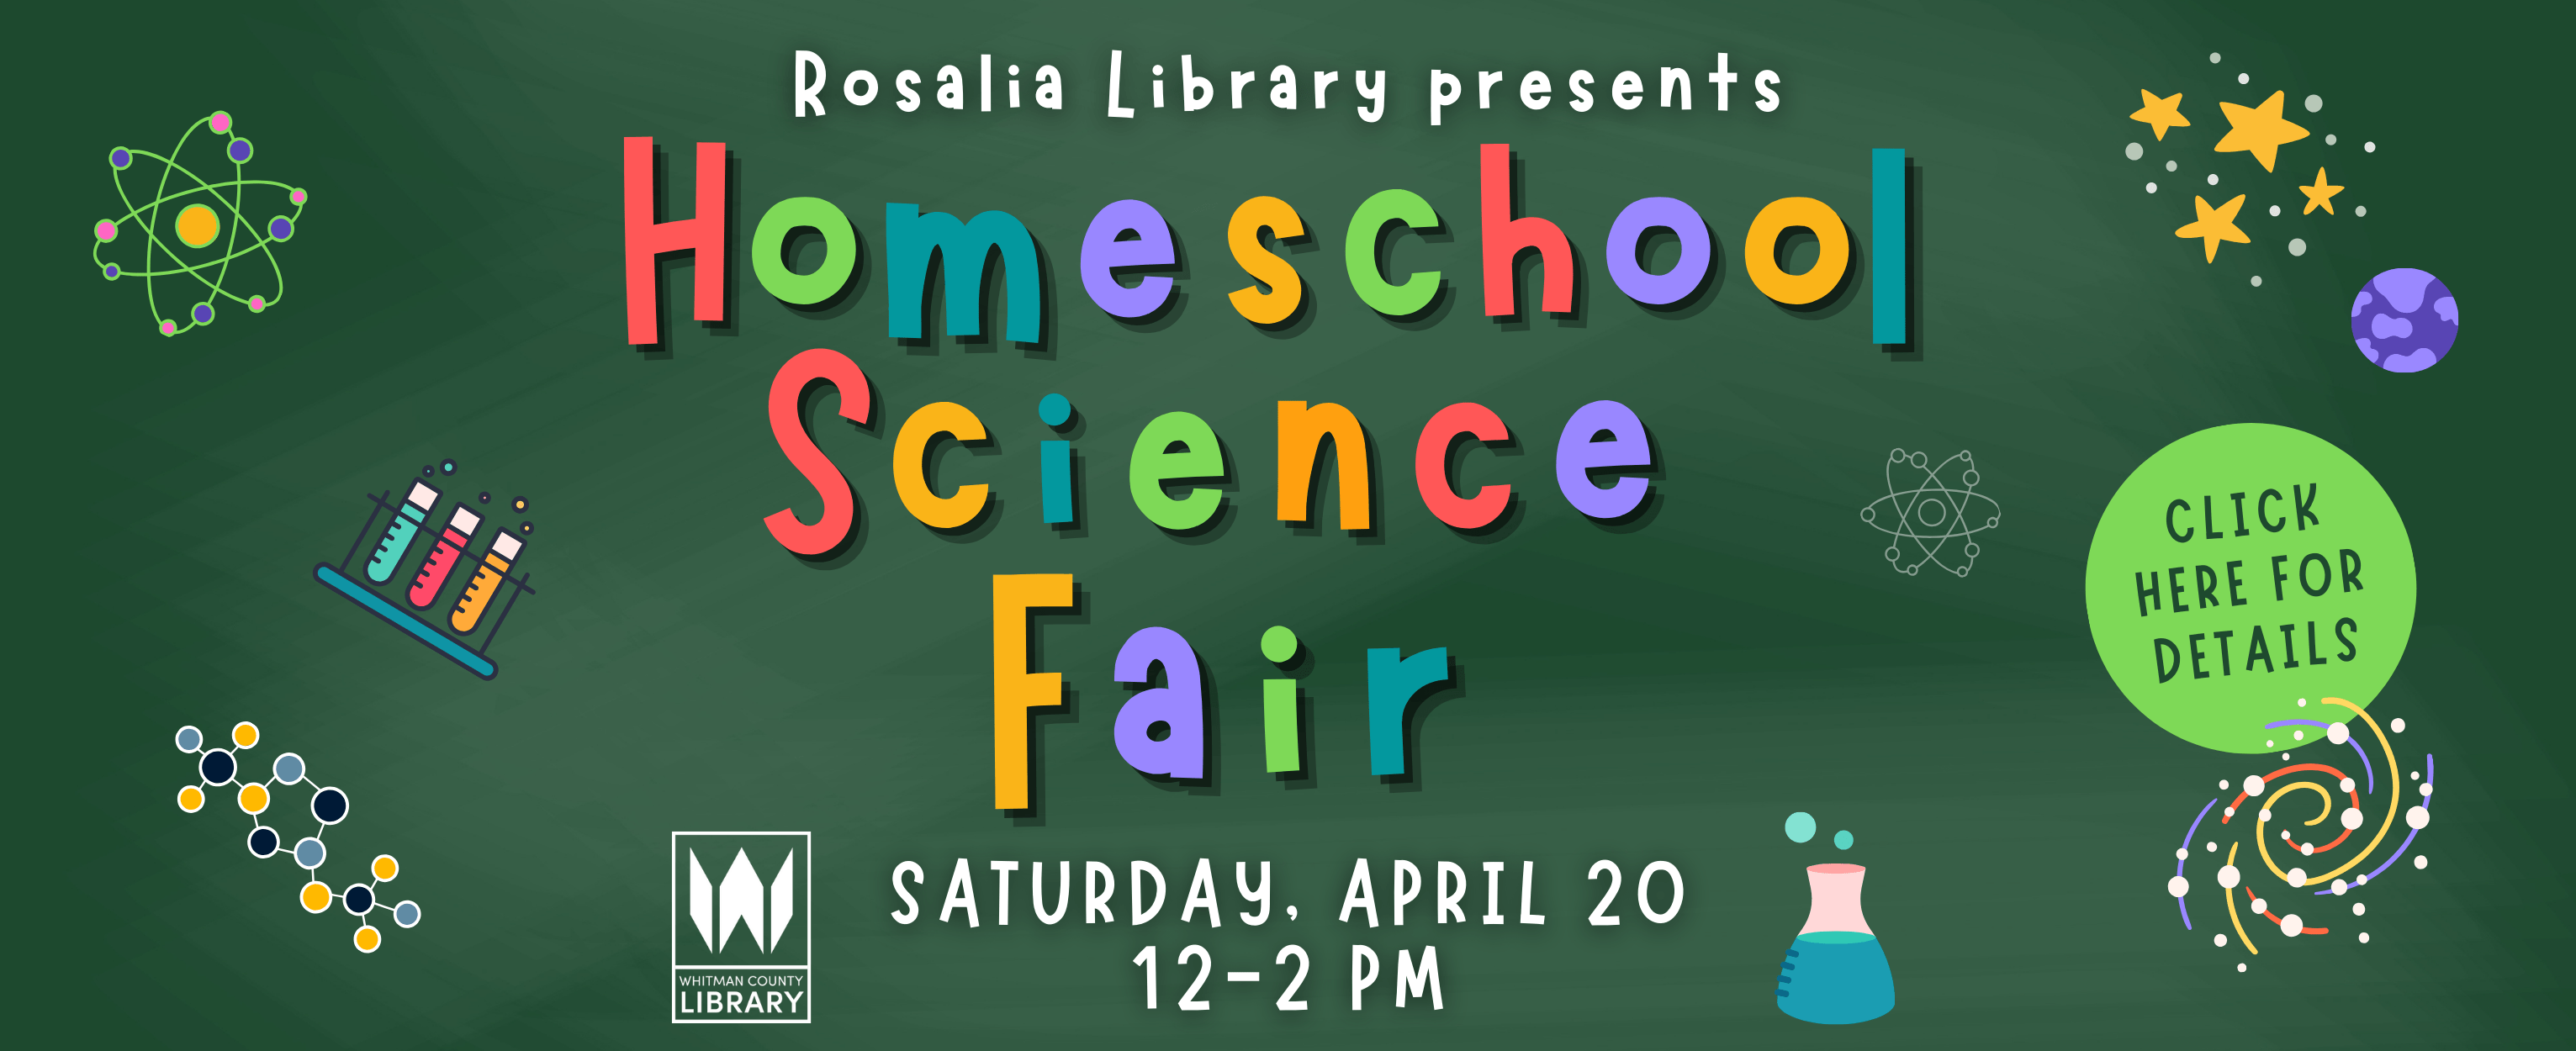 Rosalia Library presents... Homeschool Science Fair on Saturday, April 20 from 12-2 PM. Click here for details. 